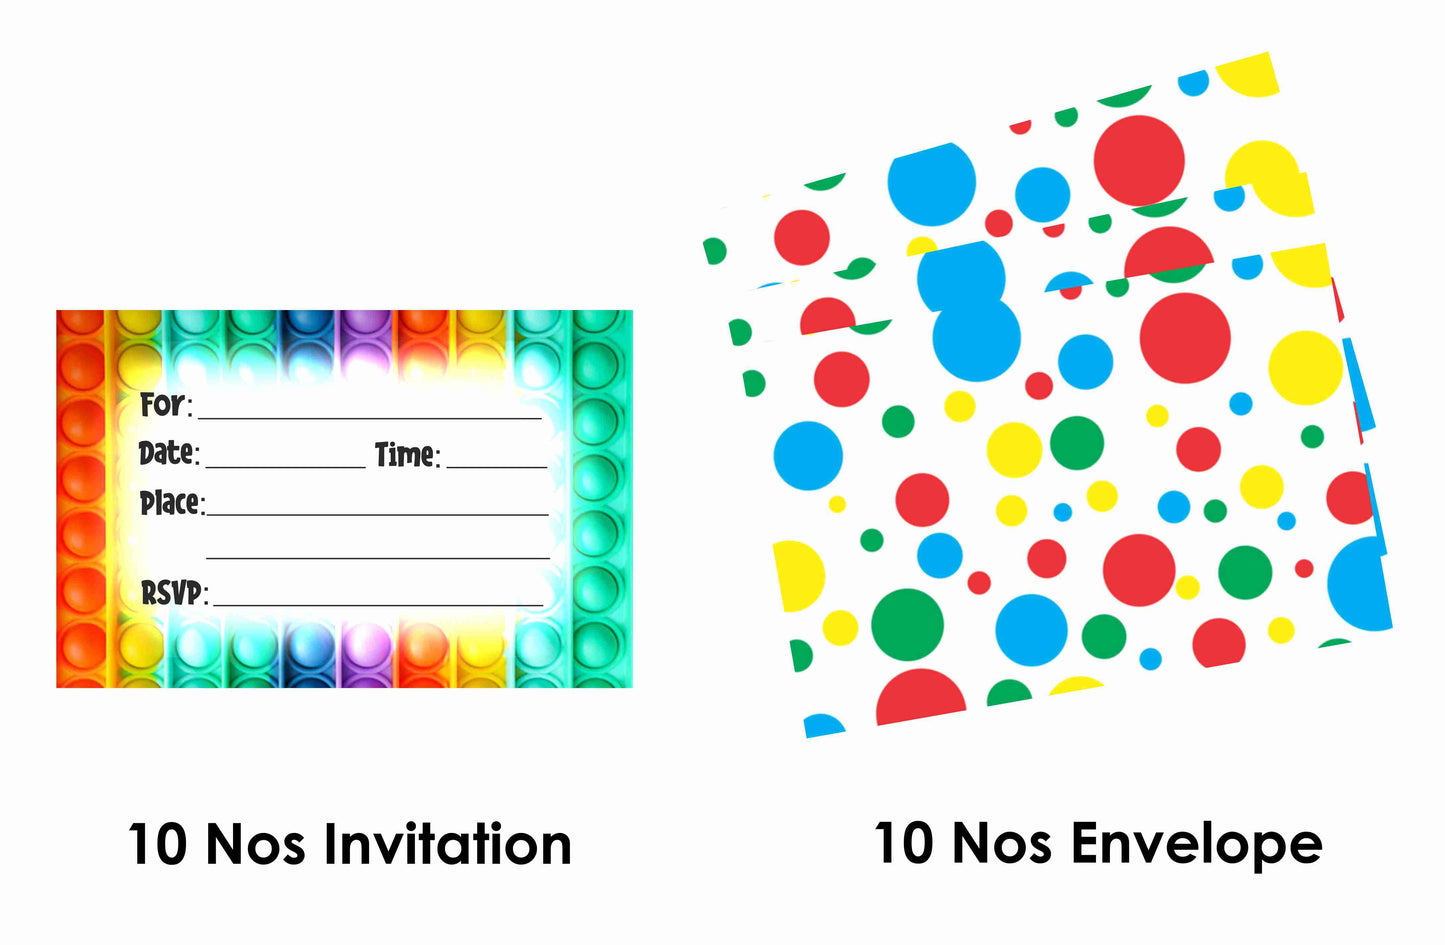 Pop It Theme Children's Birthday Party Invitations Cards with Envelopes - Kids Birthday Party Invitations for Boys or Girls,- Invitation Cards (Pack of 10)